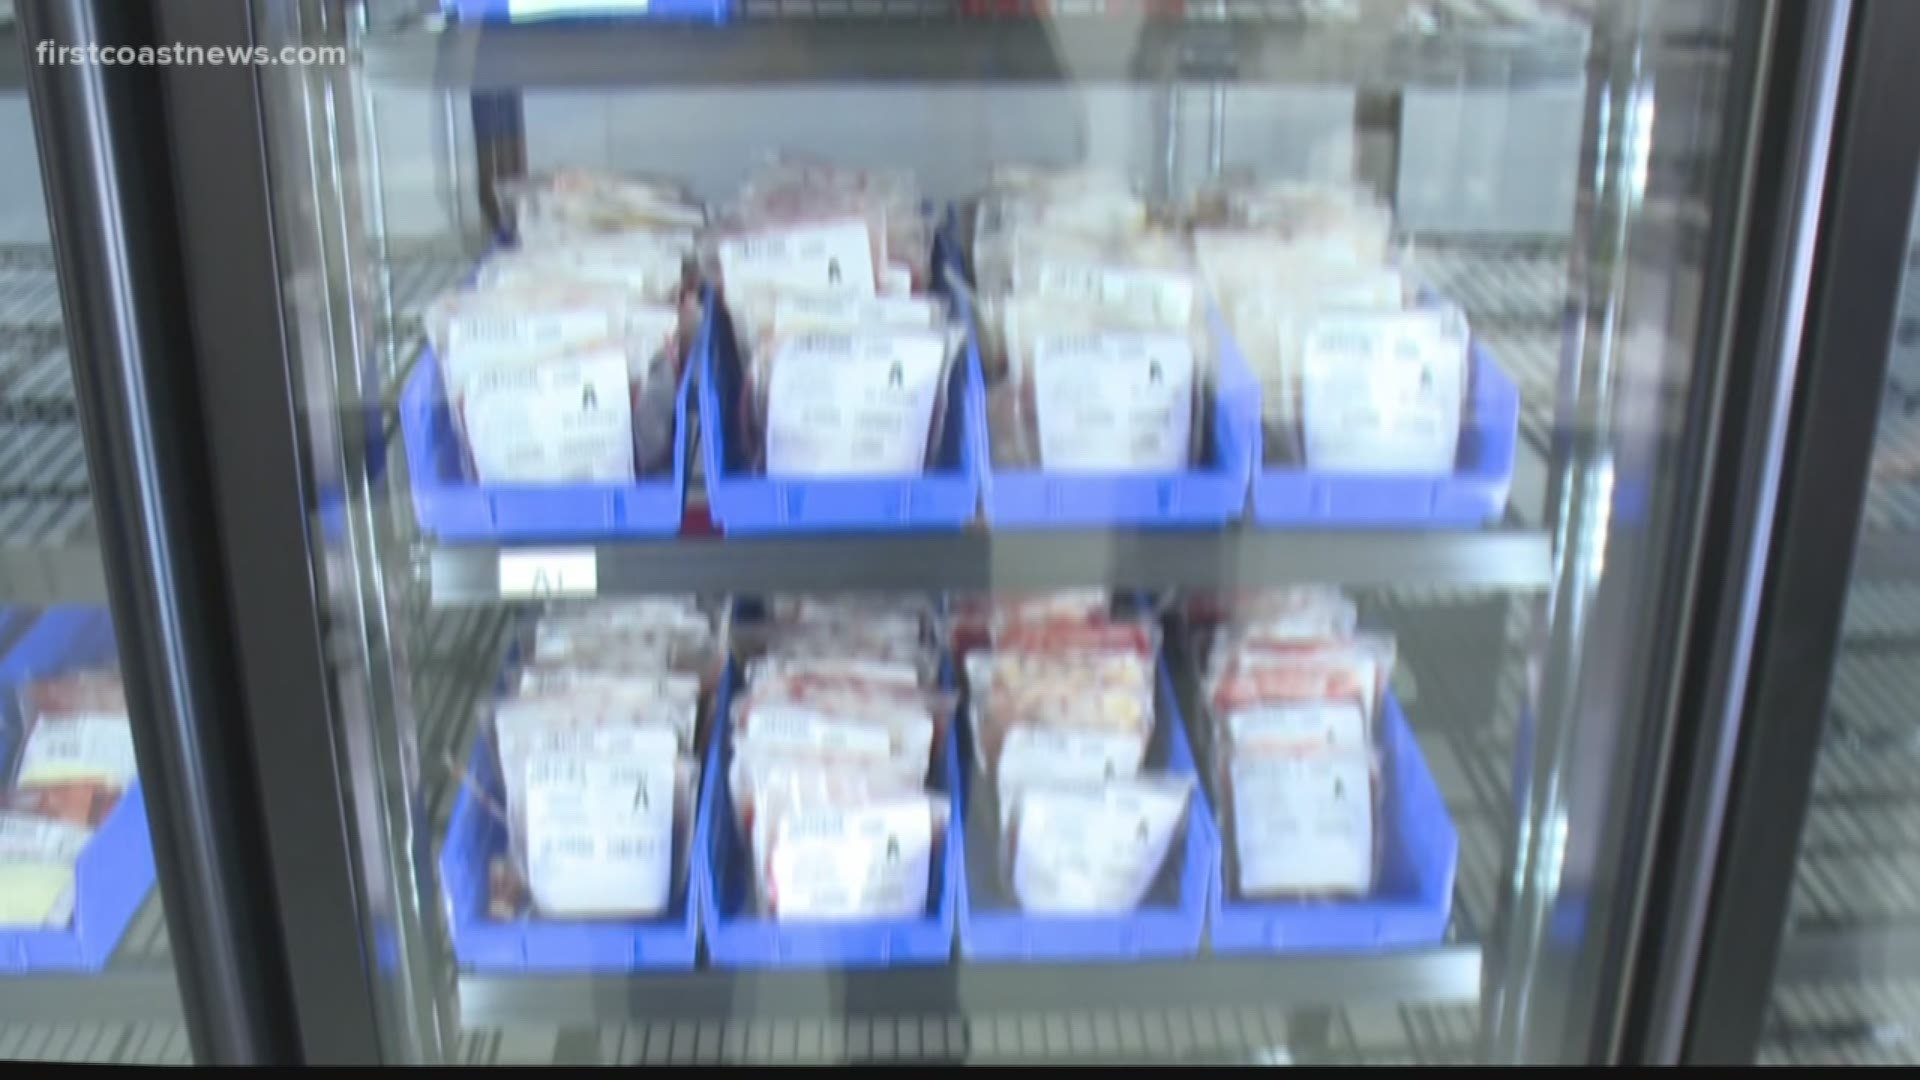 Many are wondering how blood banks will make up for the cancellations caused by the coronavirus pandemic.